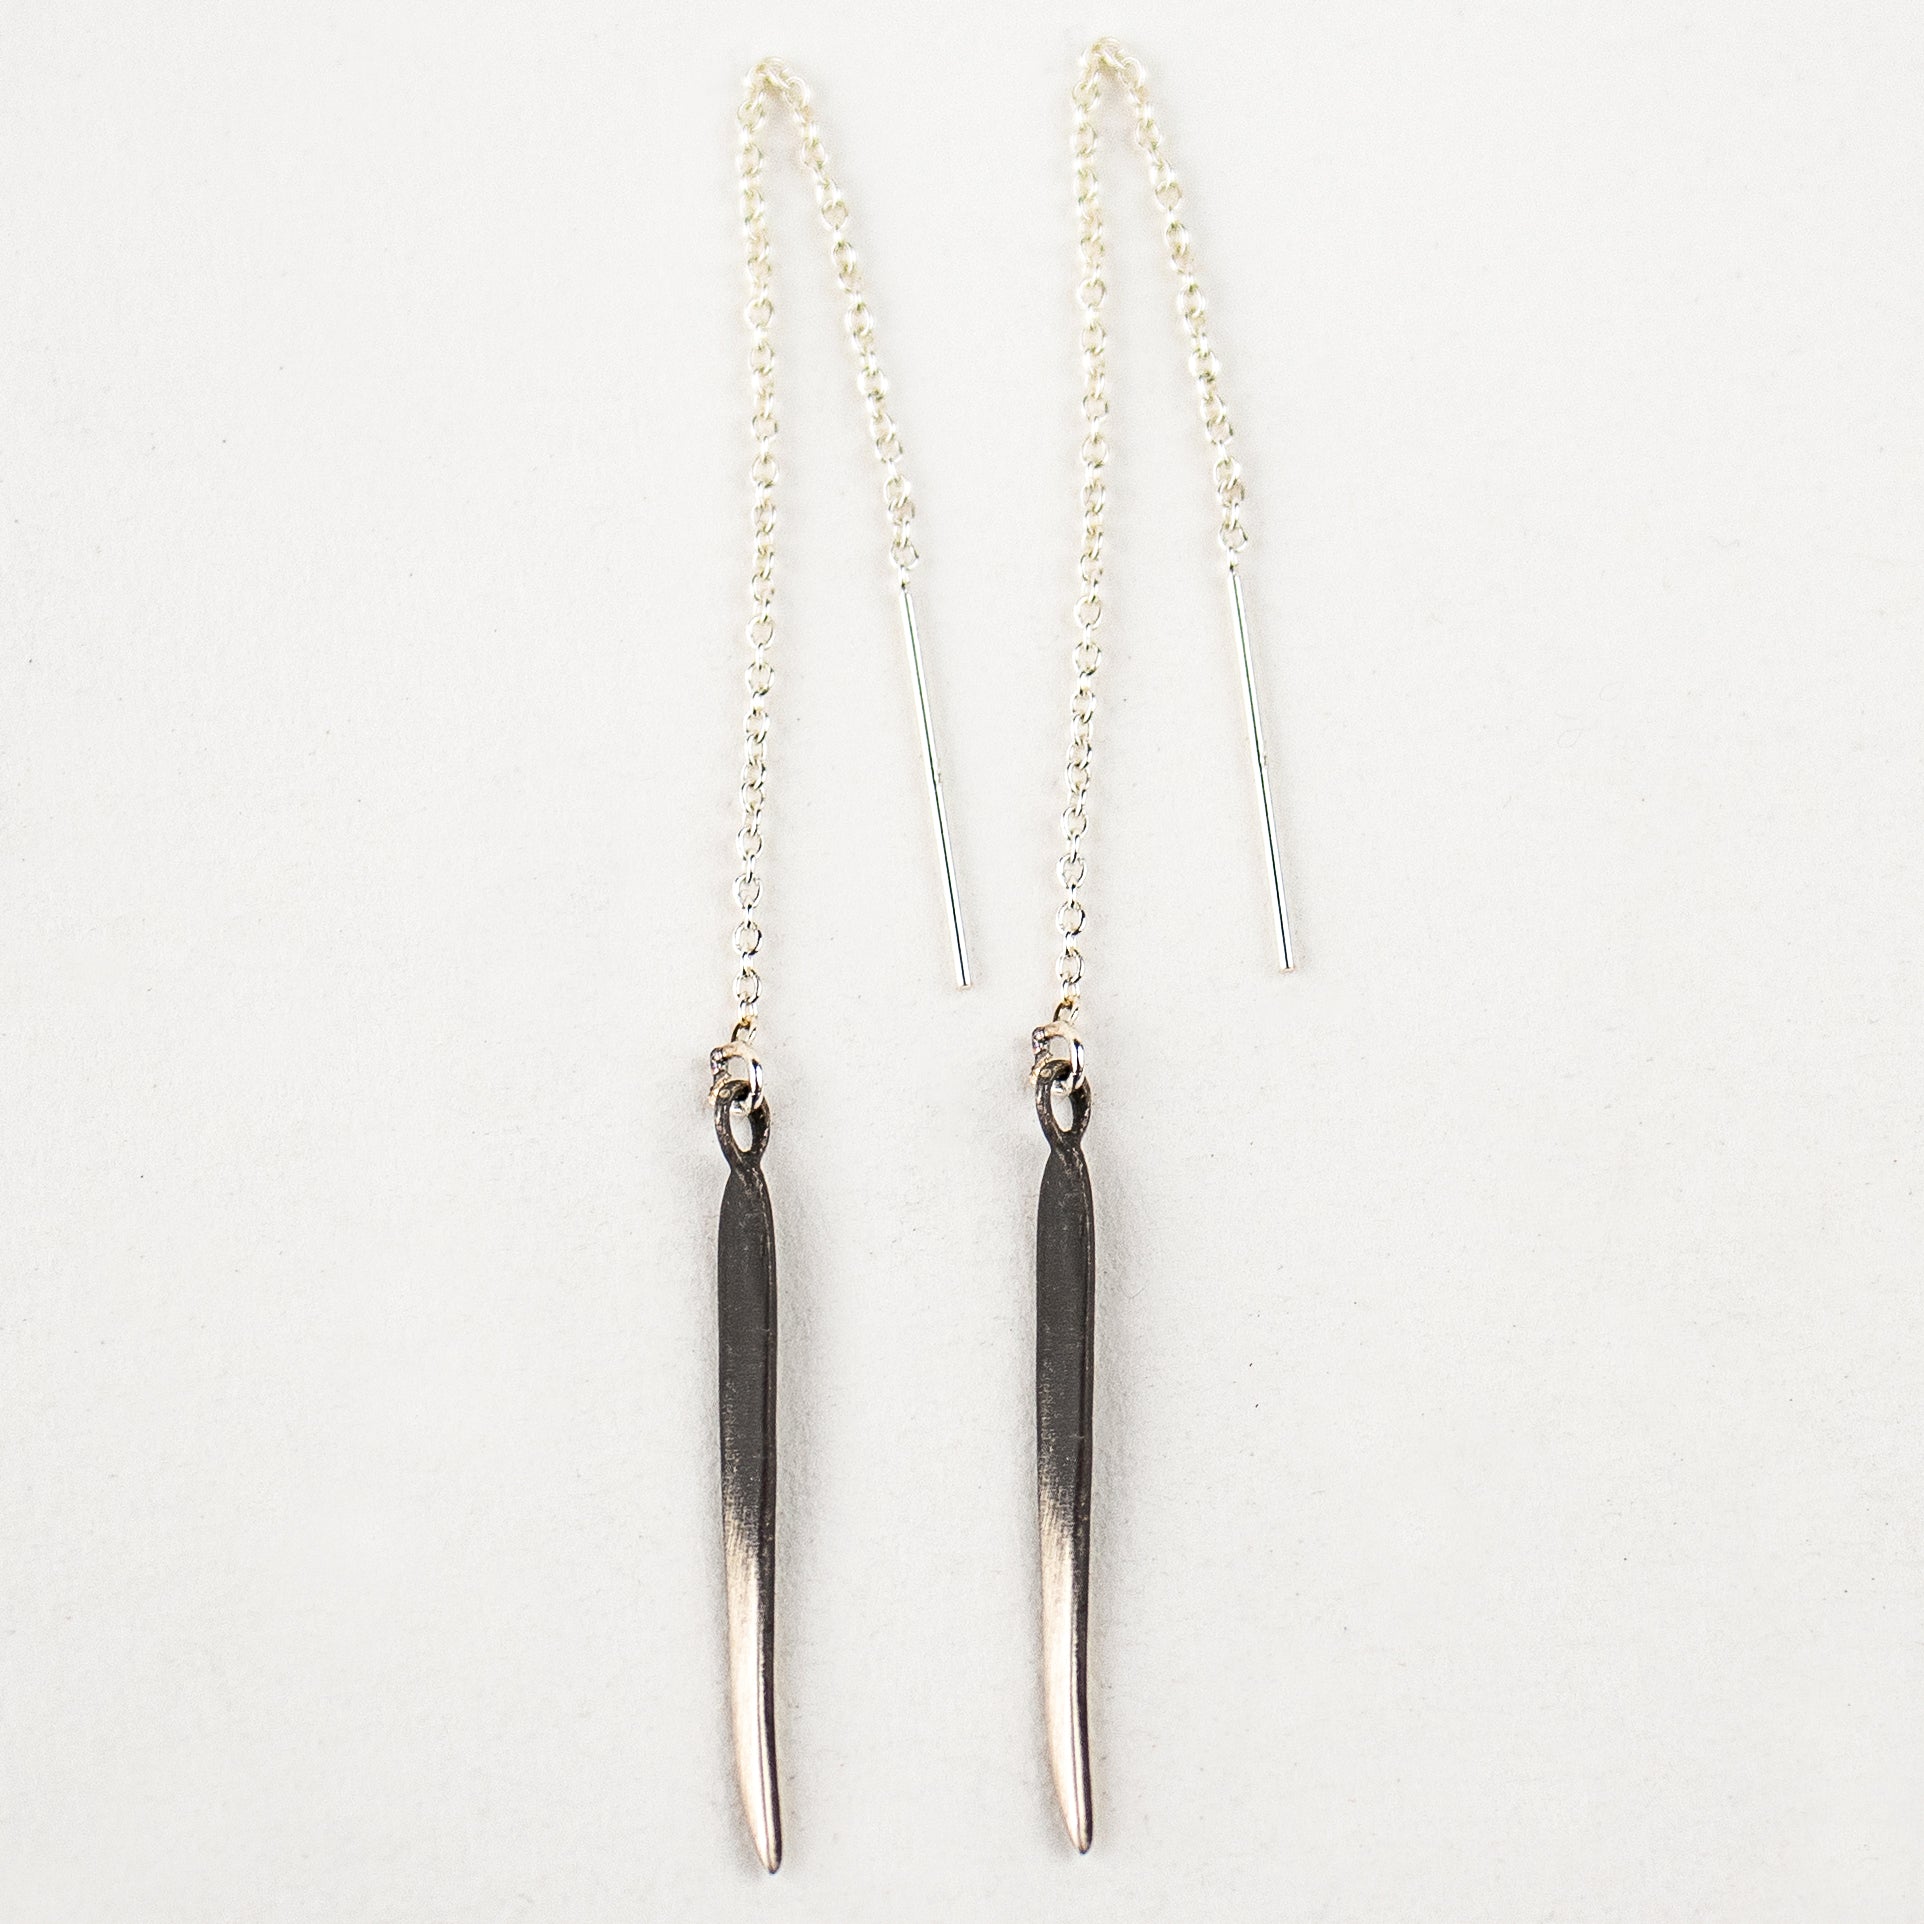 Solid reclaimed sterling silver spike measuring 1 inch and partially oxidized on sterling fine chain handmade and finished in our Catskills store-studio and available as singles to mix-and-match.